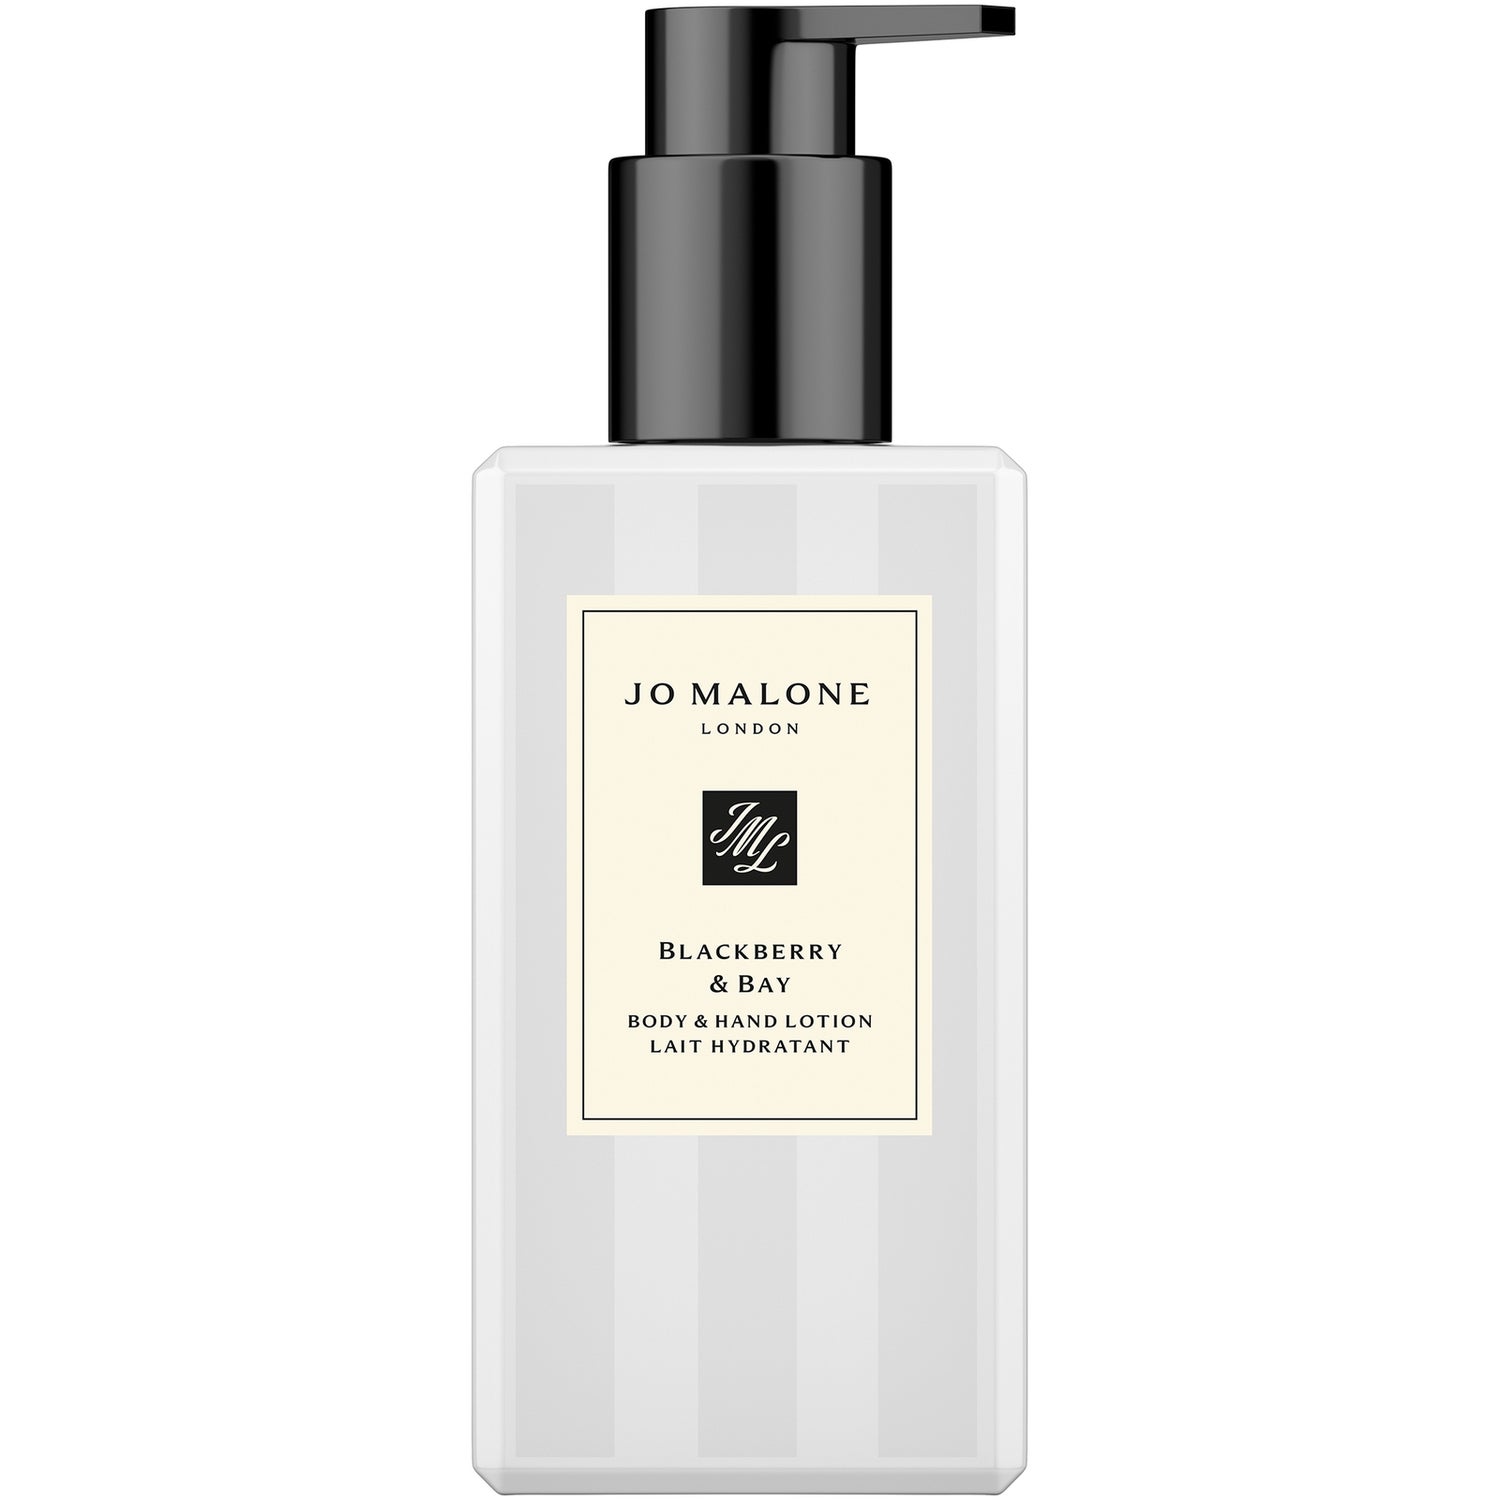 Jo Malone London Blackberry and Bay Body and Hand Lotion 250ml